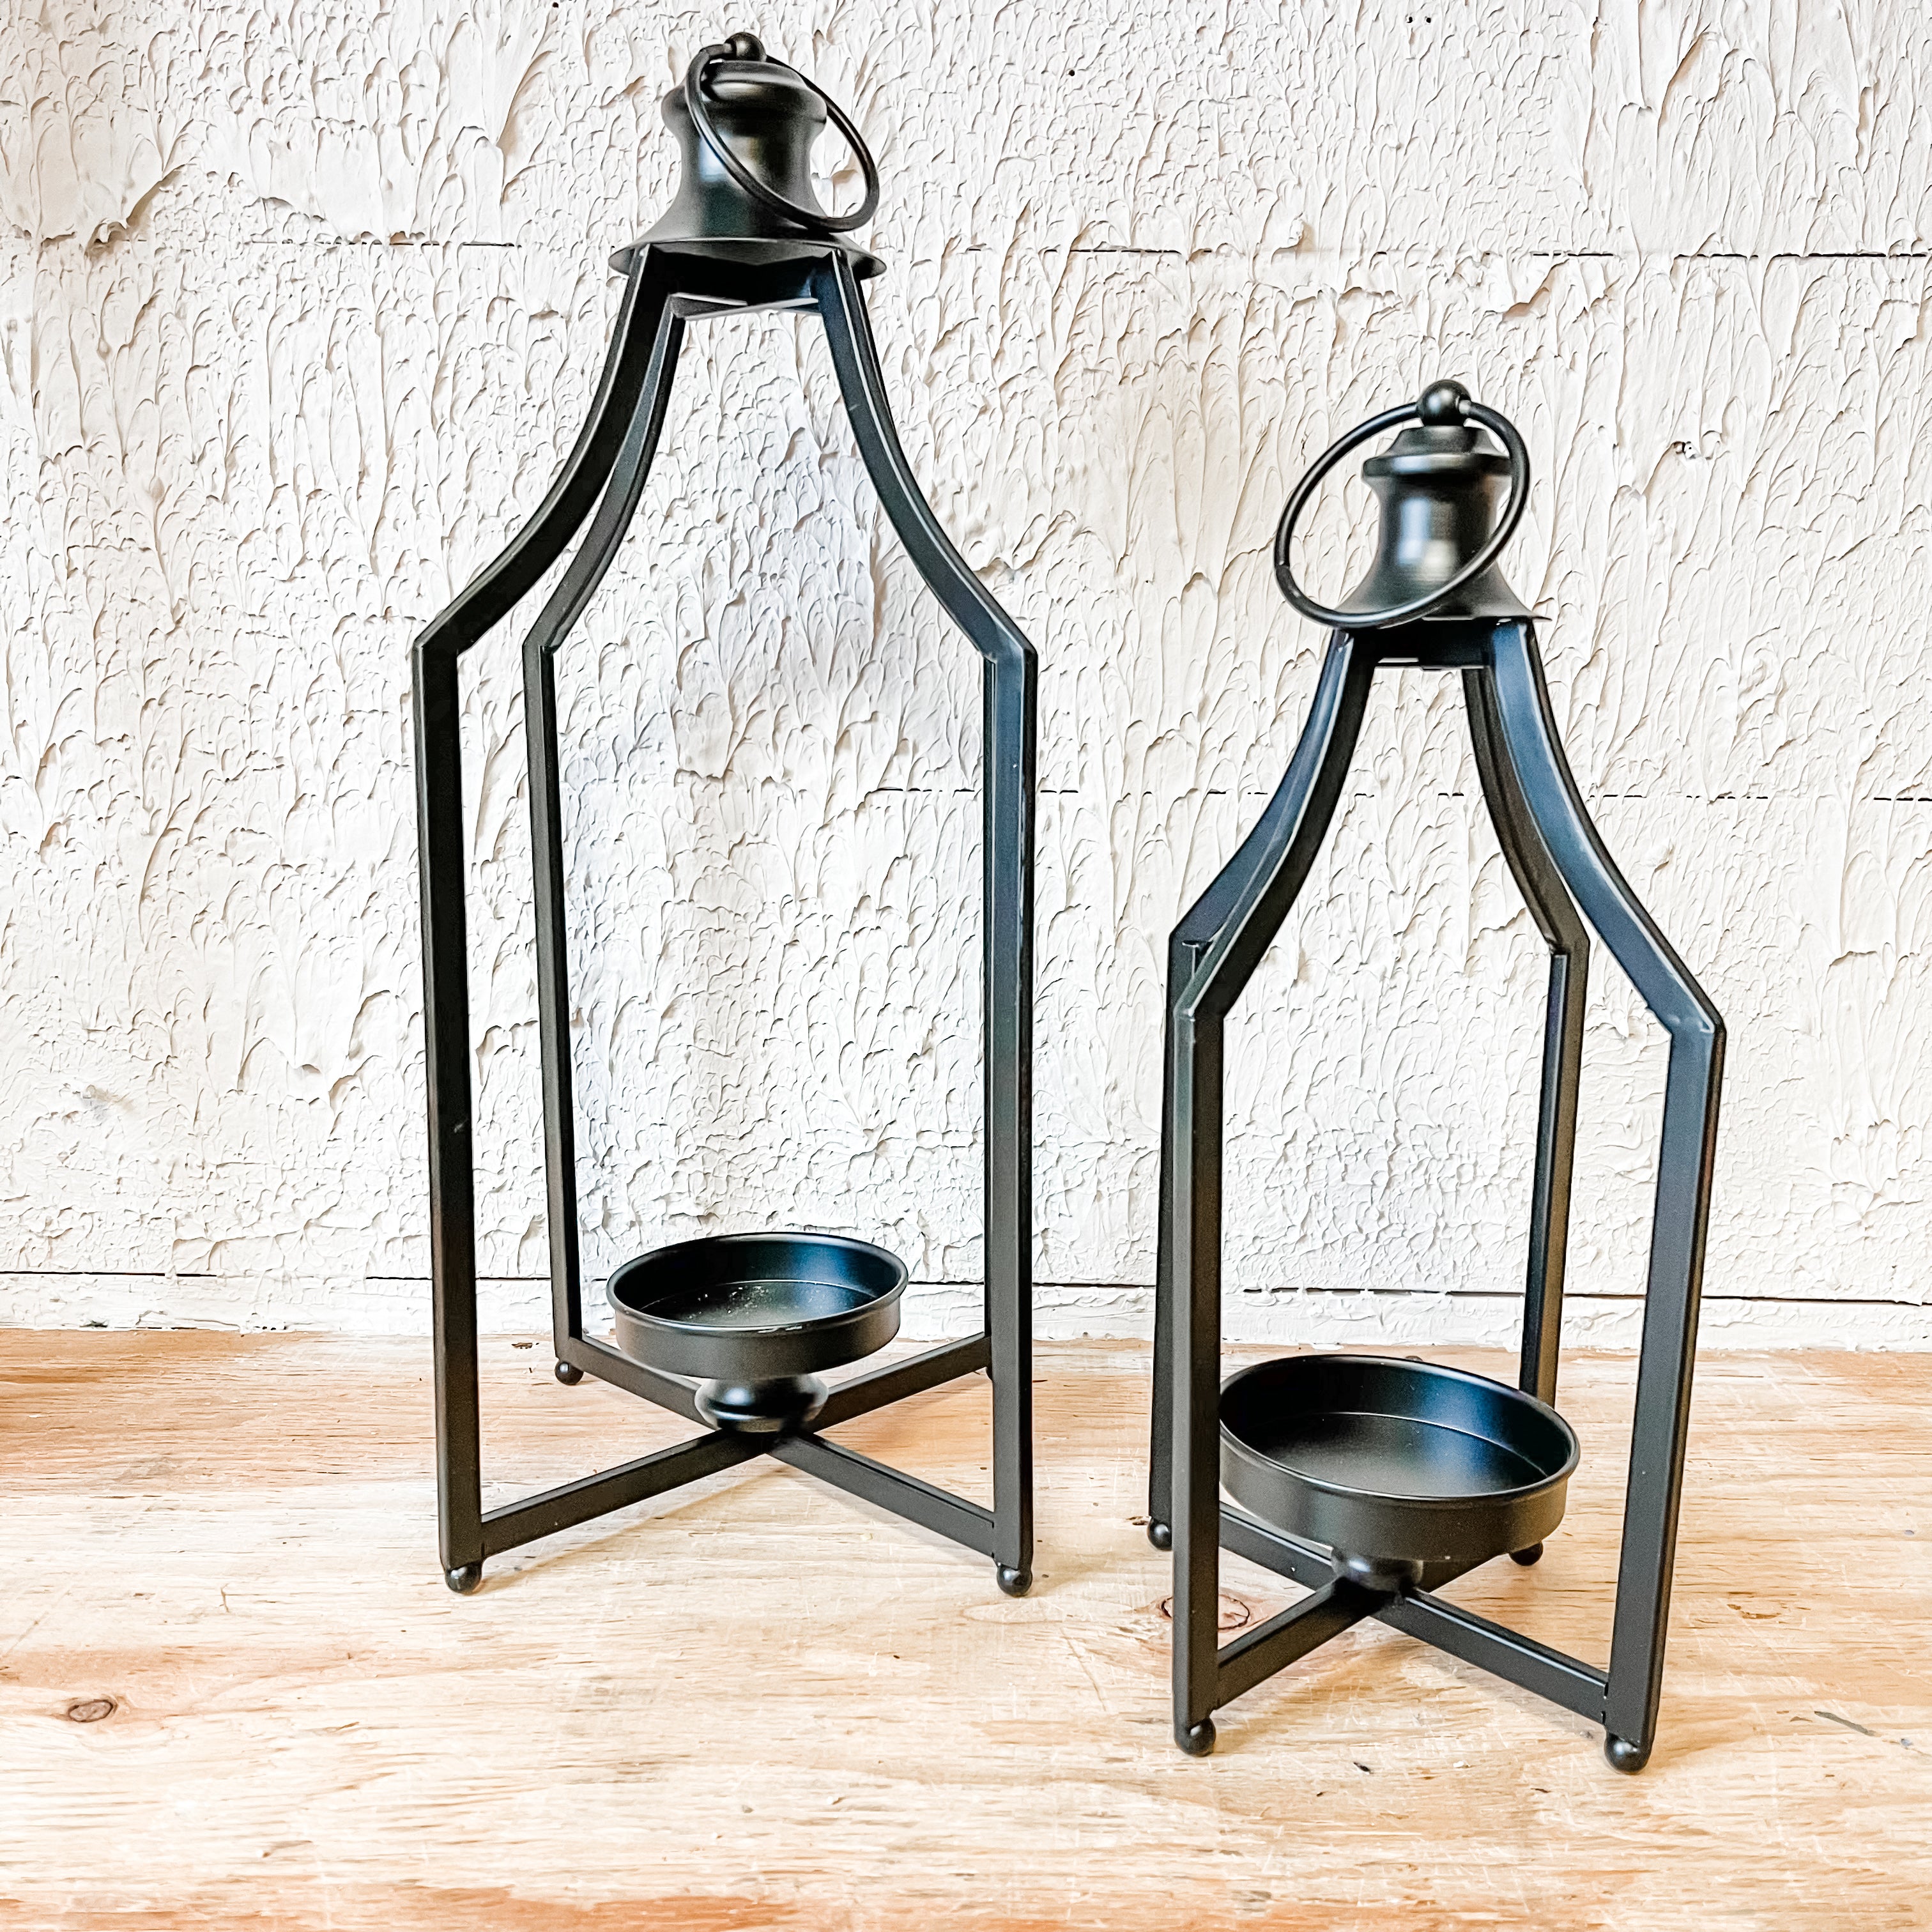 Distressed Black Open Candle Lanterns